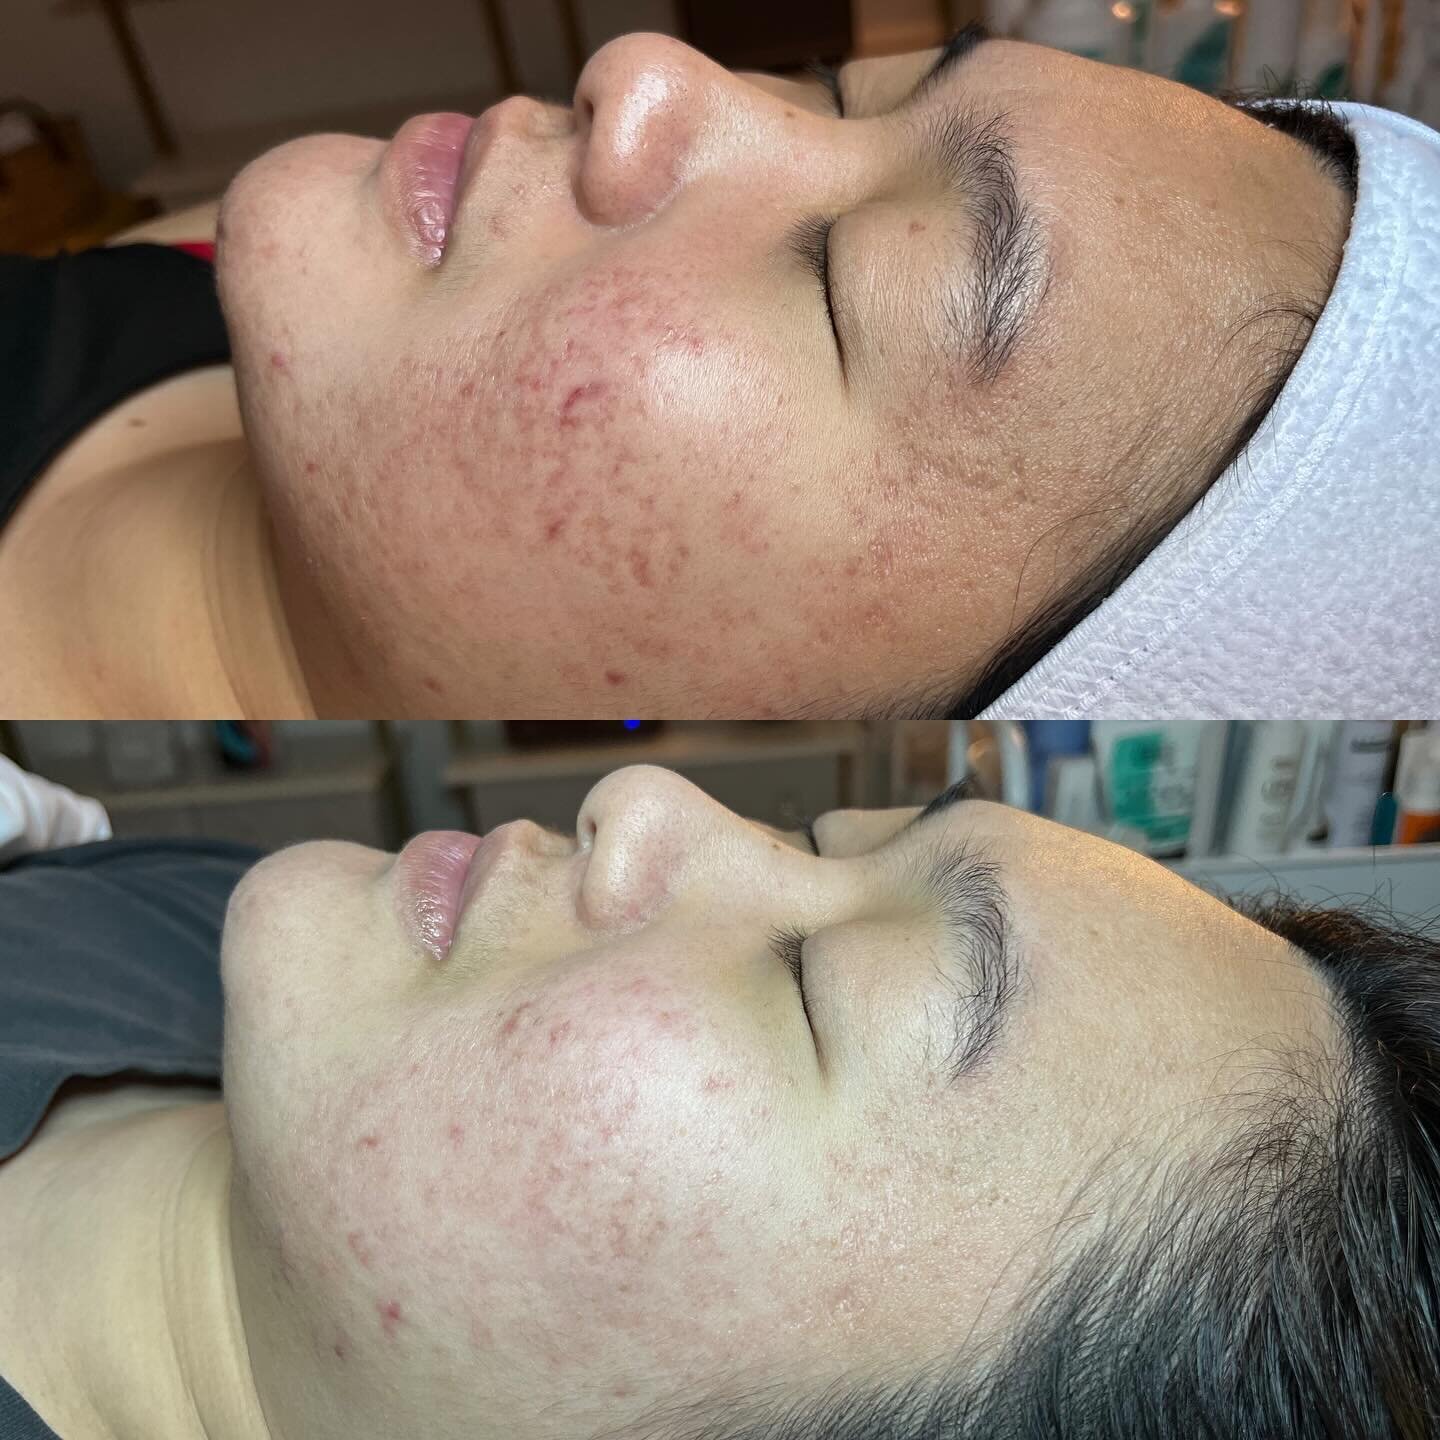 Progress over perfection. Any day. 😘🤌🏼❤️

This month, this beautiful angel and I are celebrating a YEAR of monthly facials, a proper skin regimen and commitment to her overall skin health! 🥲

Her skin barrier has not only improved, but we have al